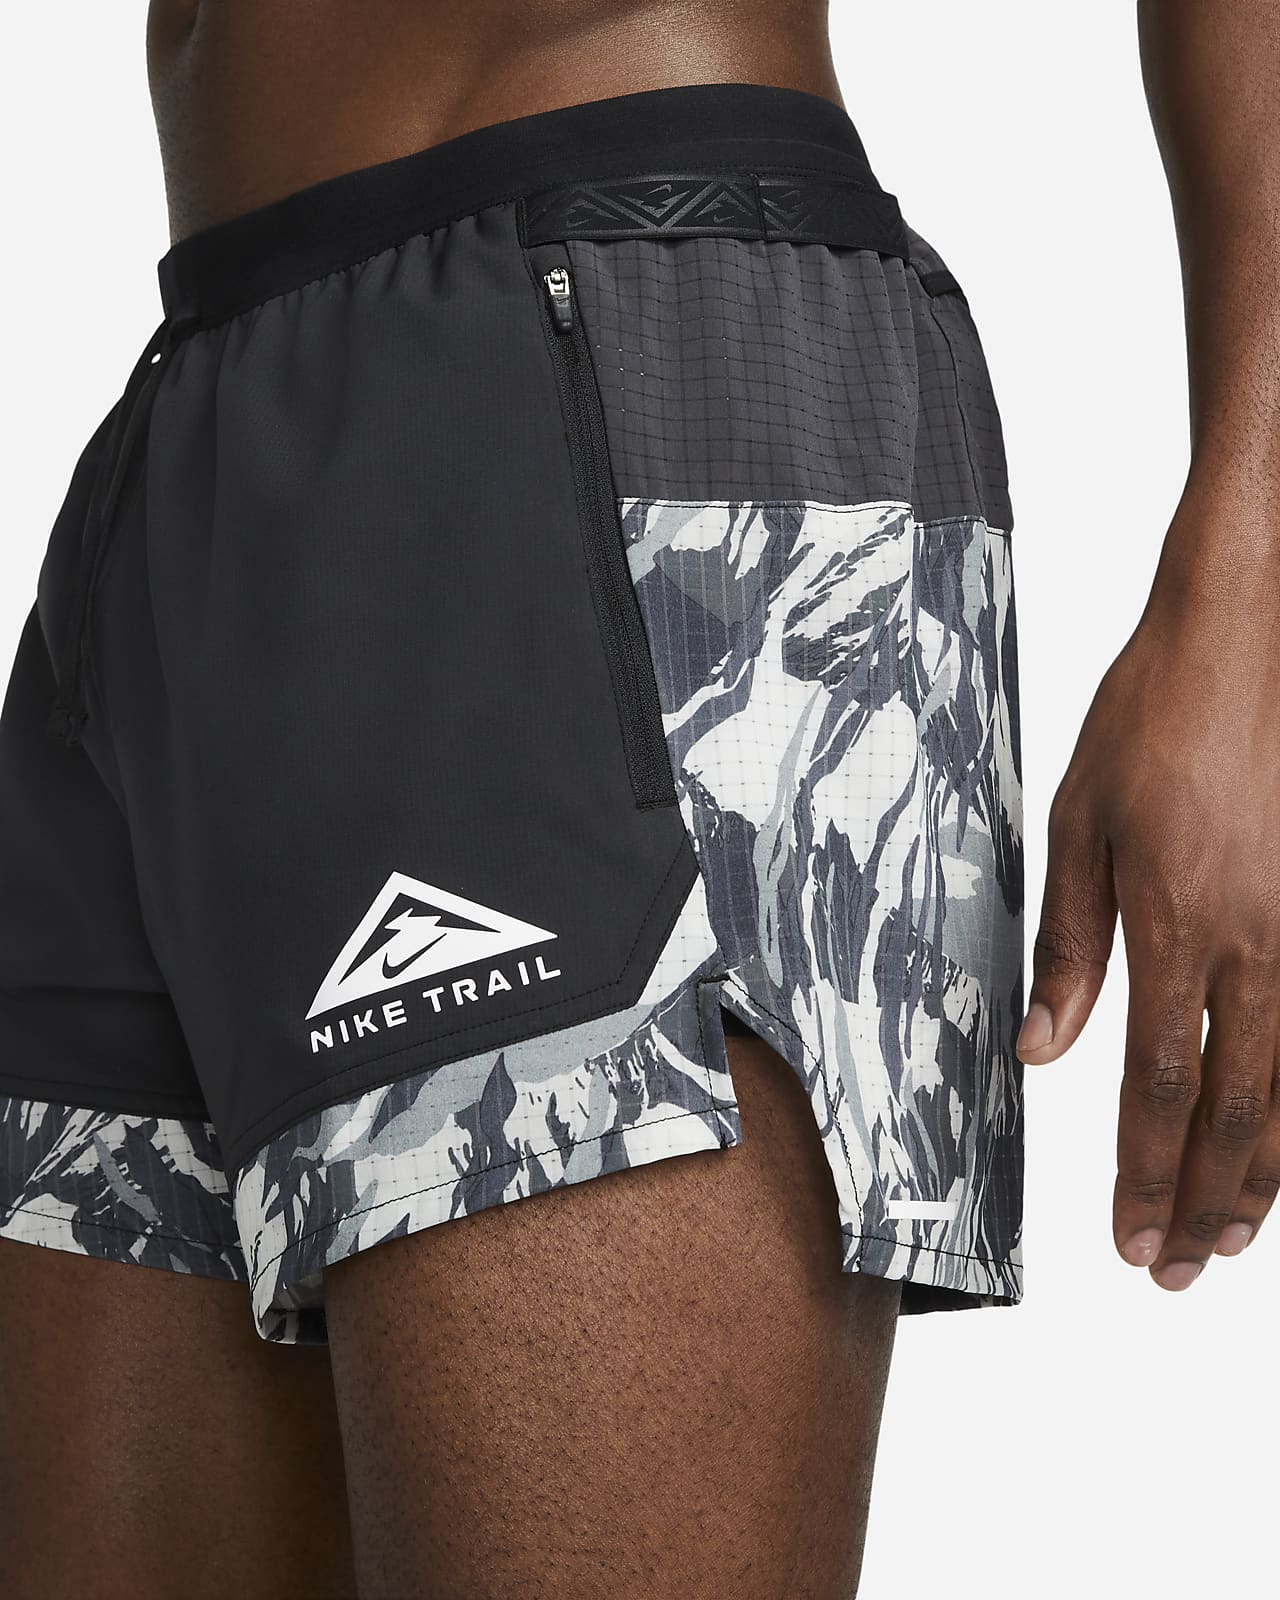 Brief-Lined Trail Running Shorts. Nike 